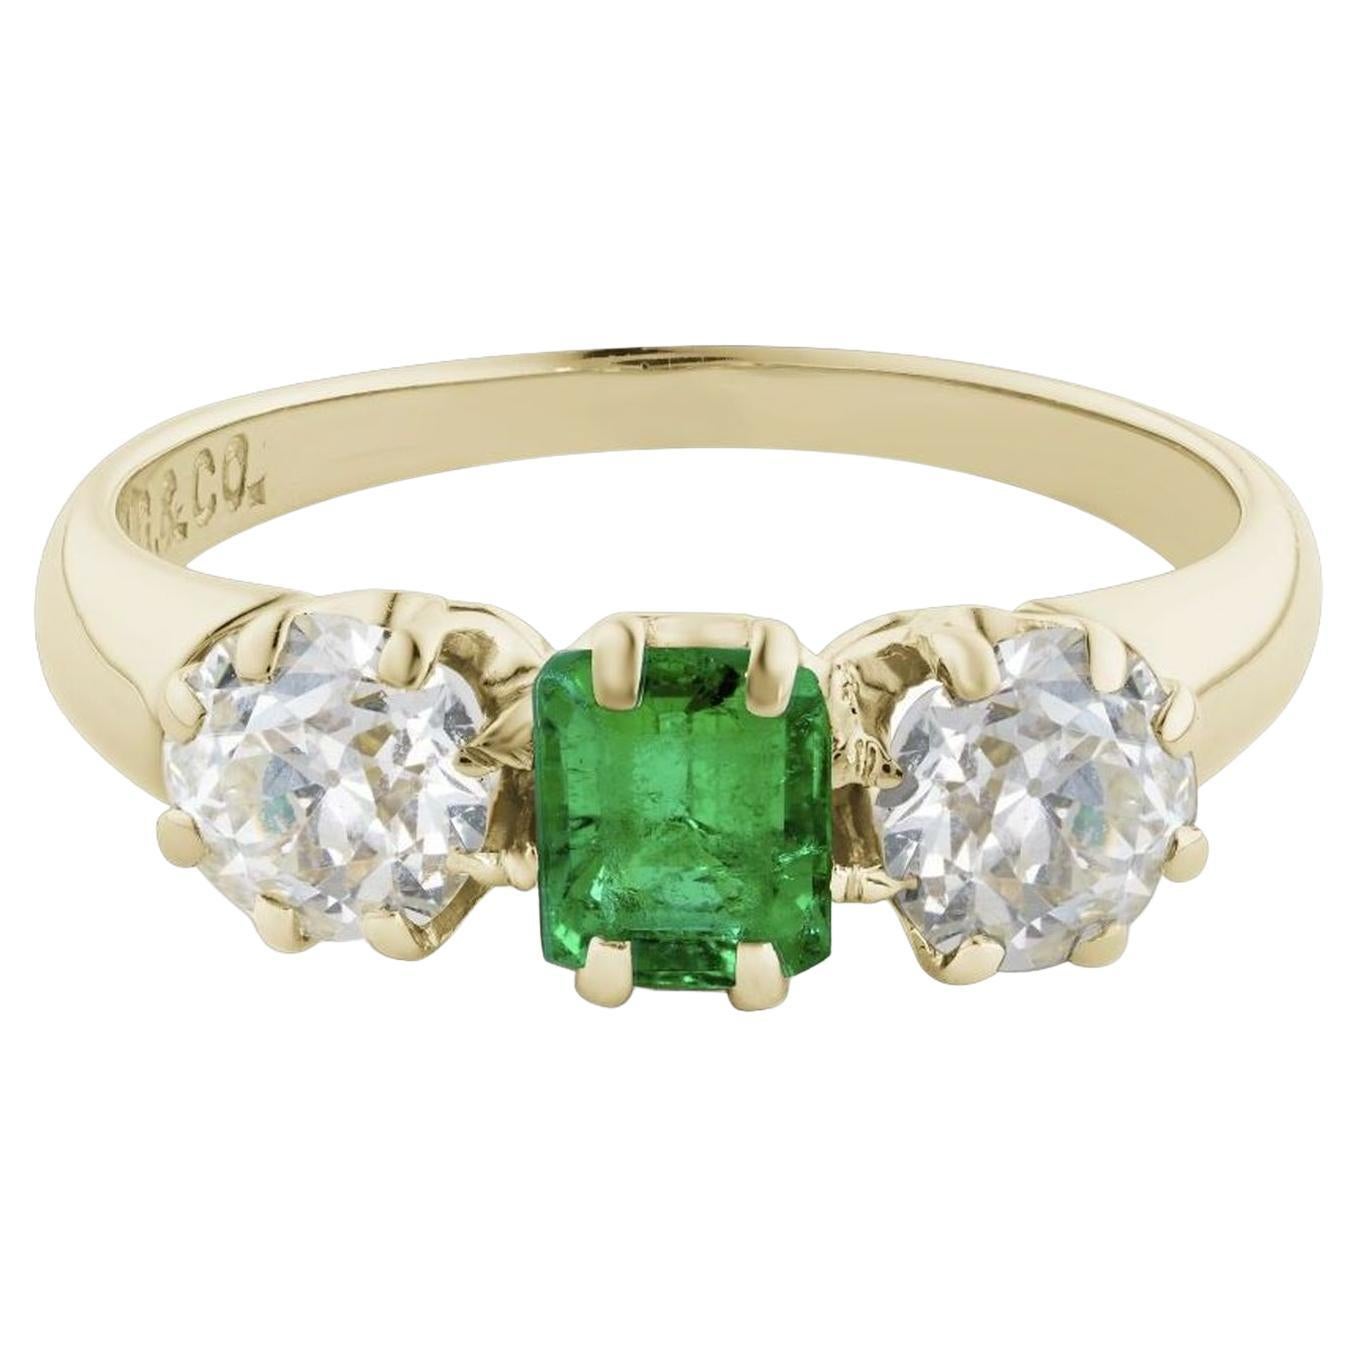 Simply Beautiful! Finely crafted Three Stone Emerald and Diamond Ring. Centering a Hand set securely nestled Emerald-Cut Emerald weighing approx. 0.46 Carat with an Old European-Cut Diamond on either side; approx. 0.35 Carat, approx. 0.70tcw. J-K VS